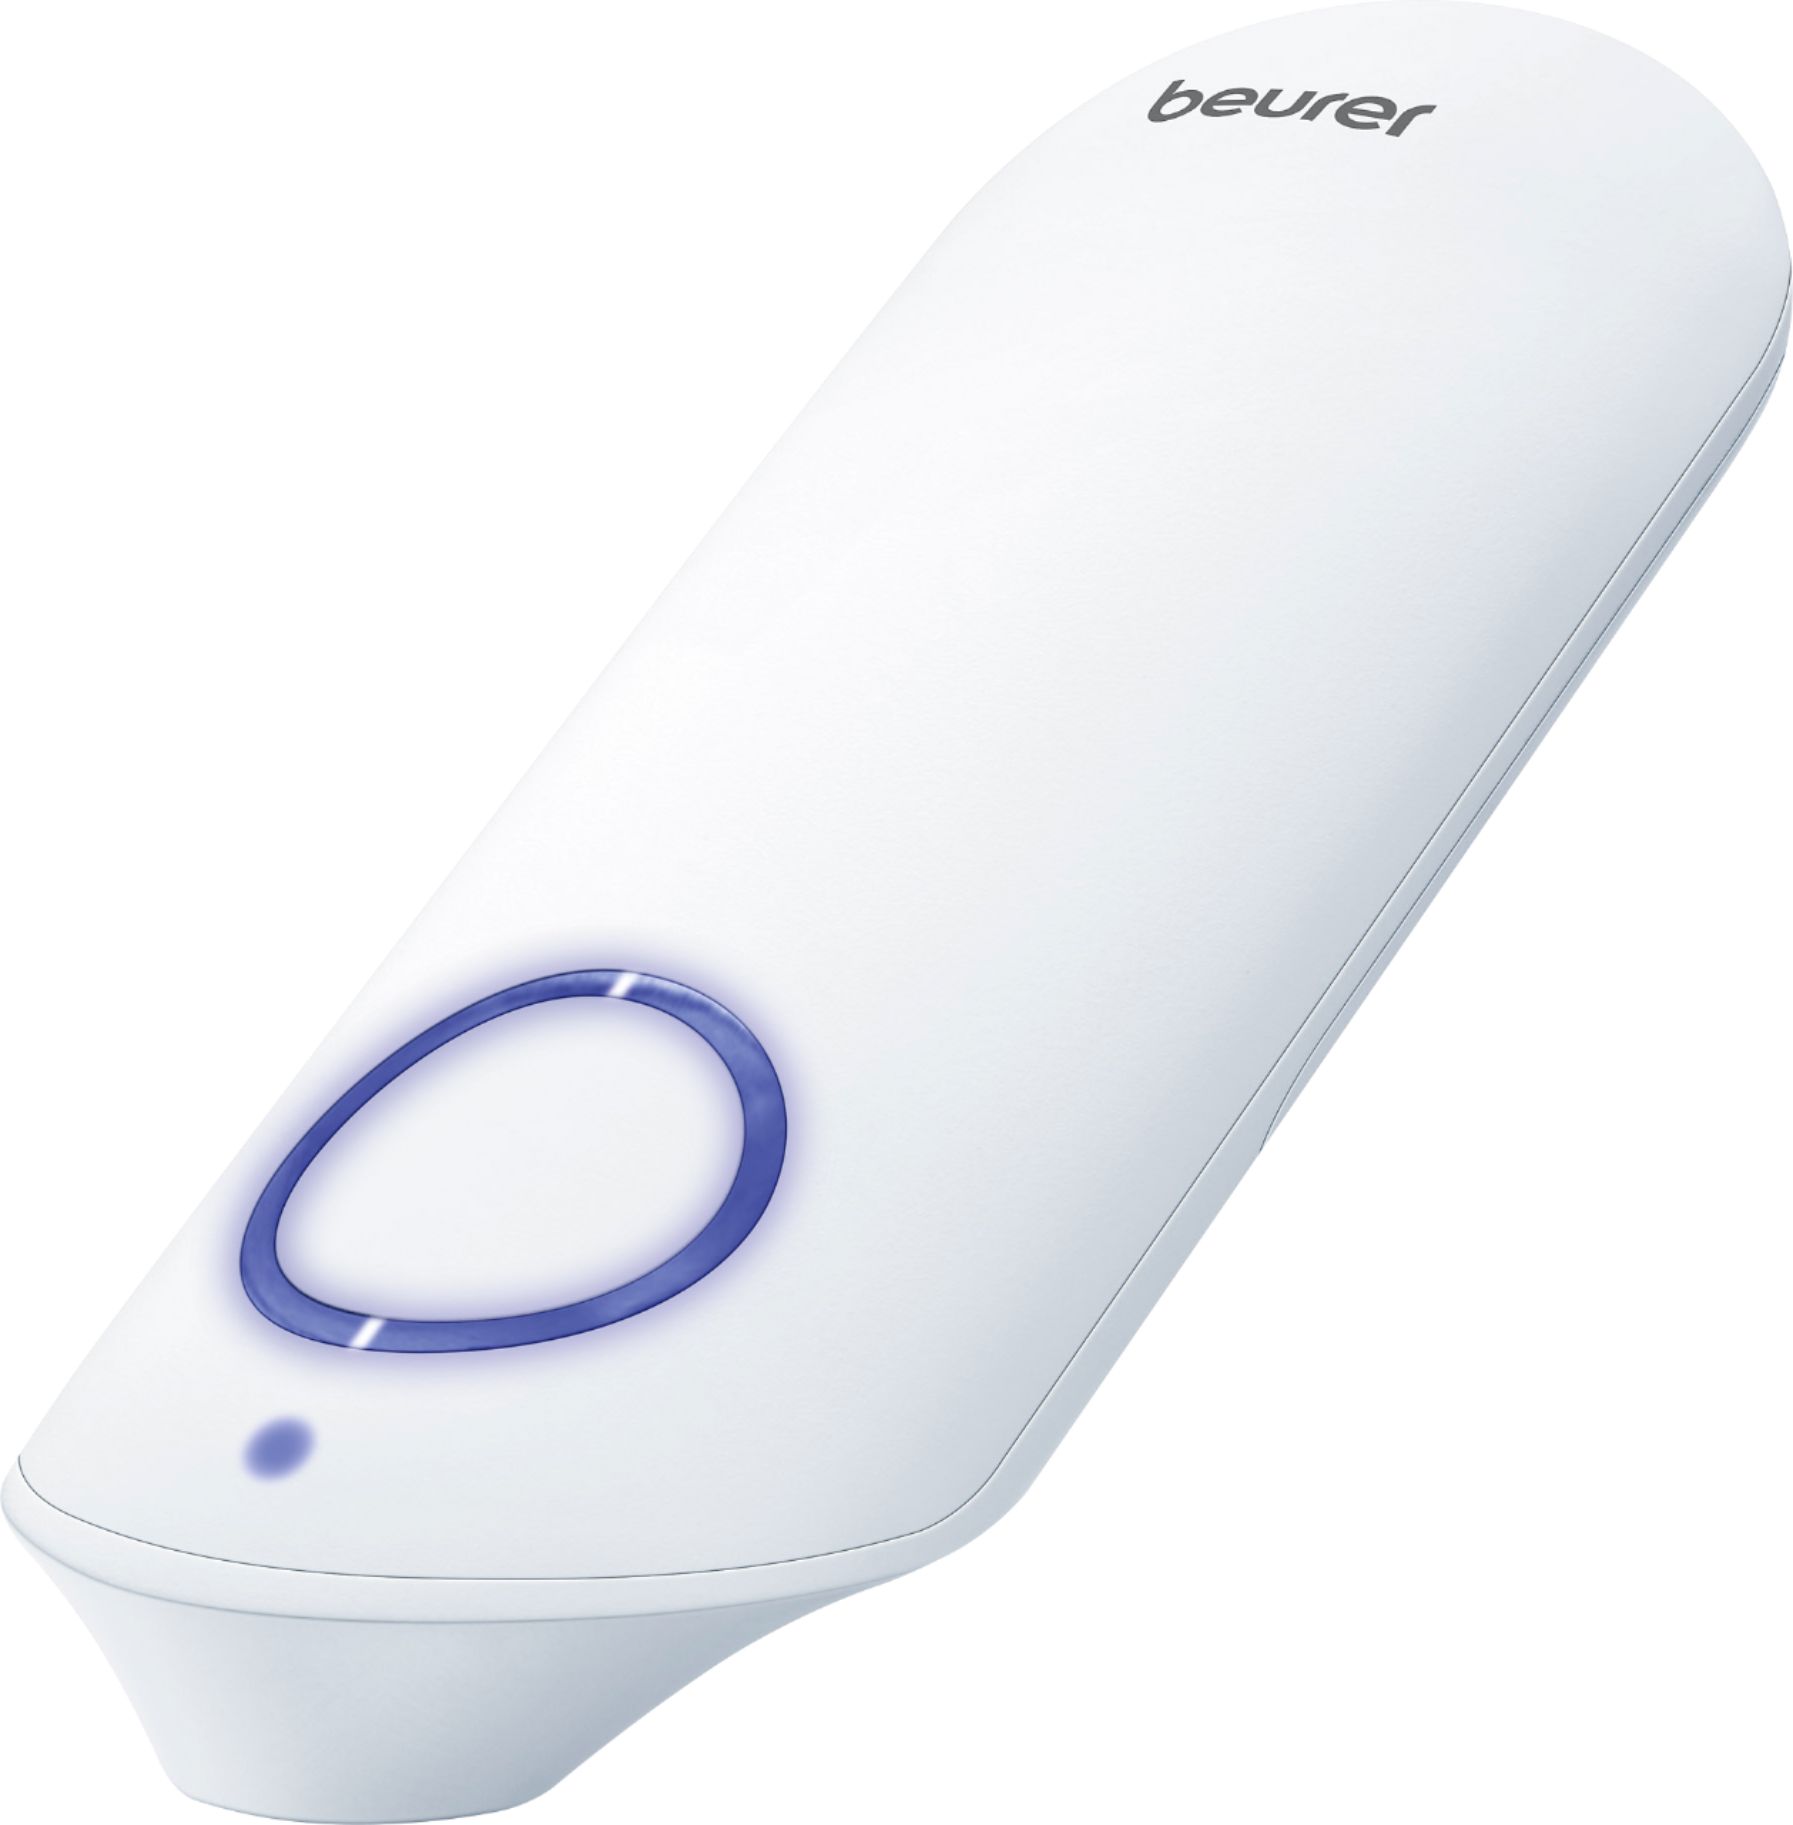 Beurer – Insect Bite Healer – white – Just $24.99 at Best Buy